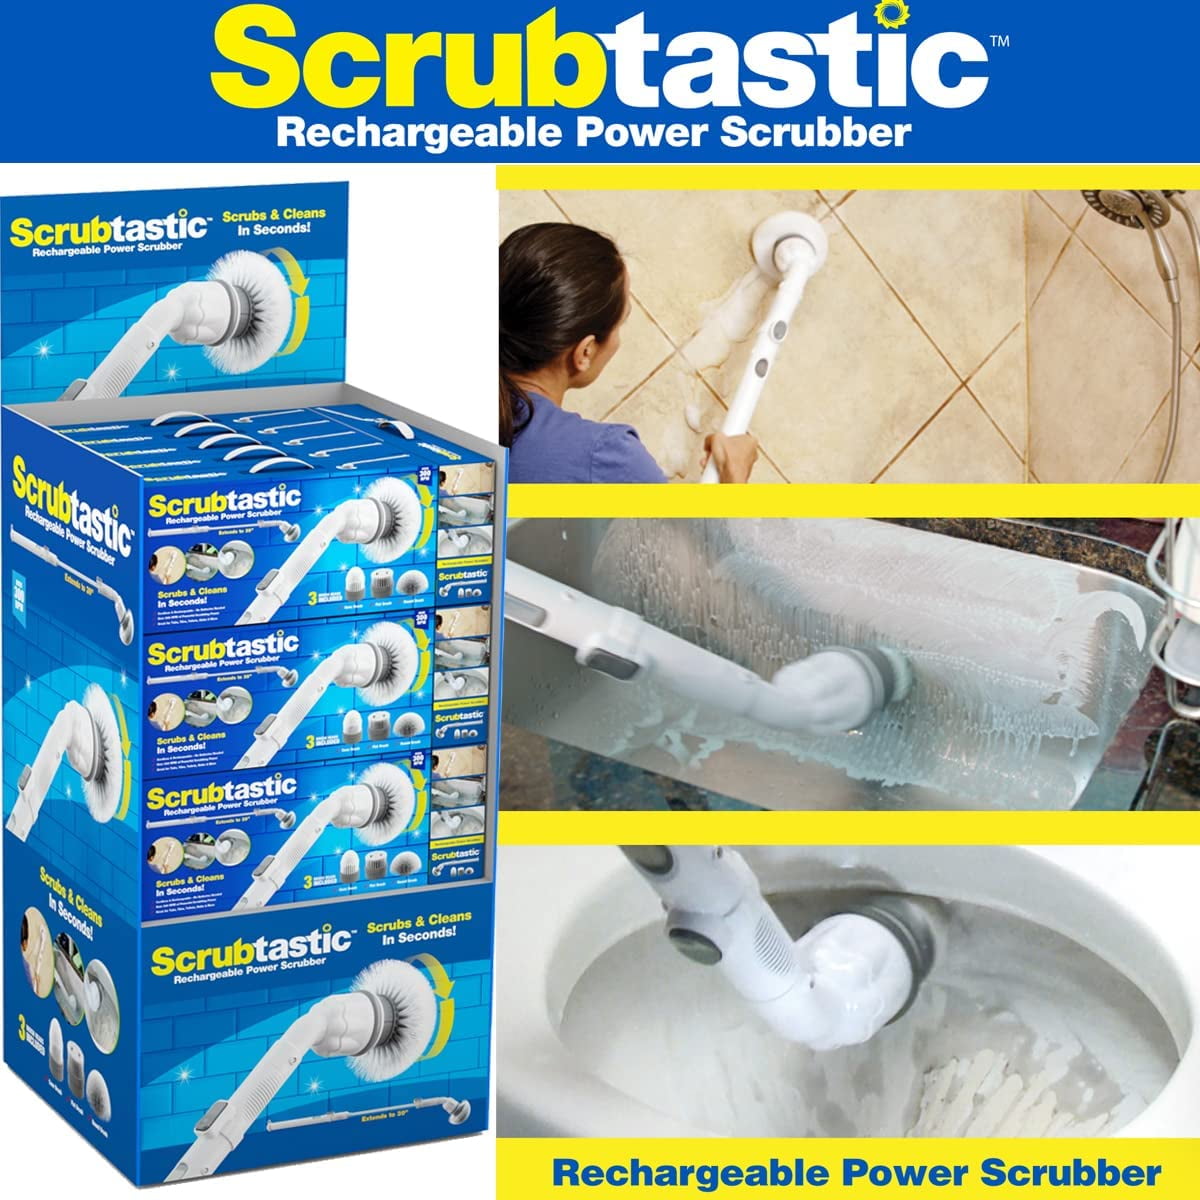 Scrubtastic Rechargeable Power Scrubber – Bell + Howell